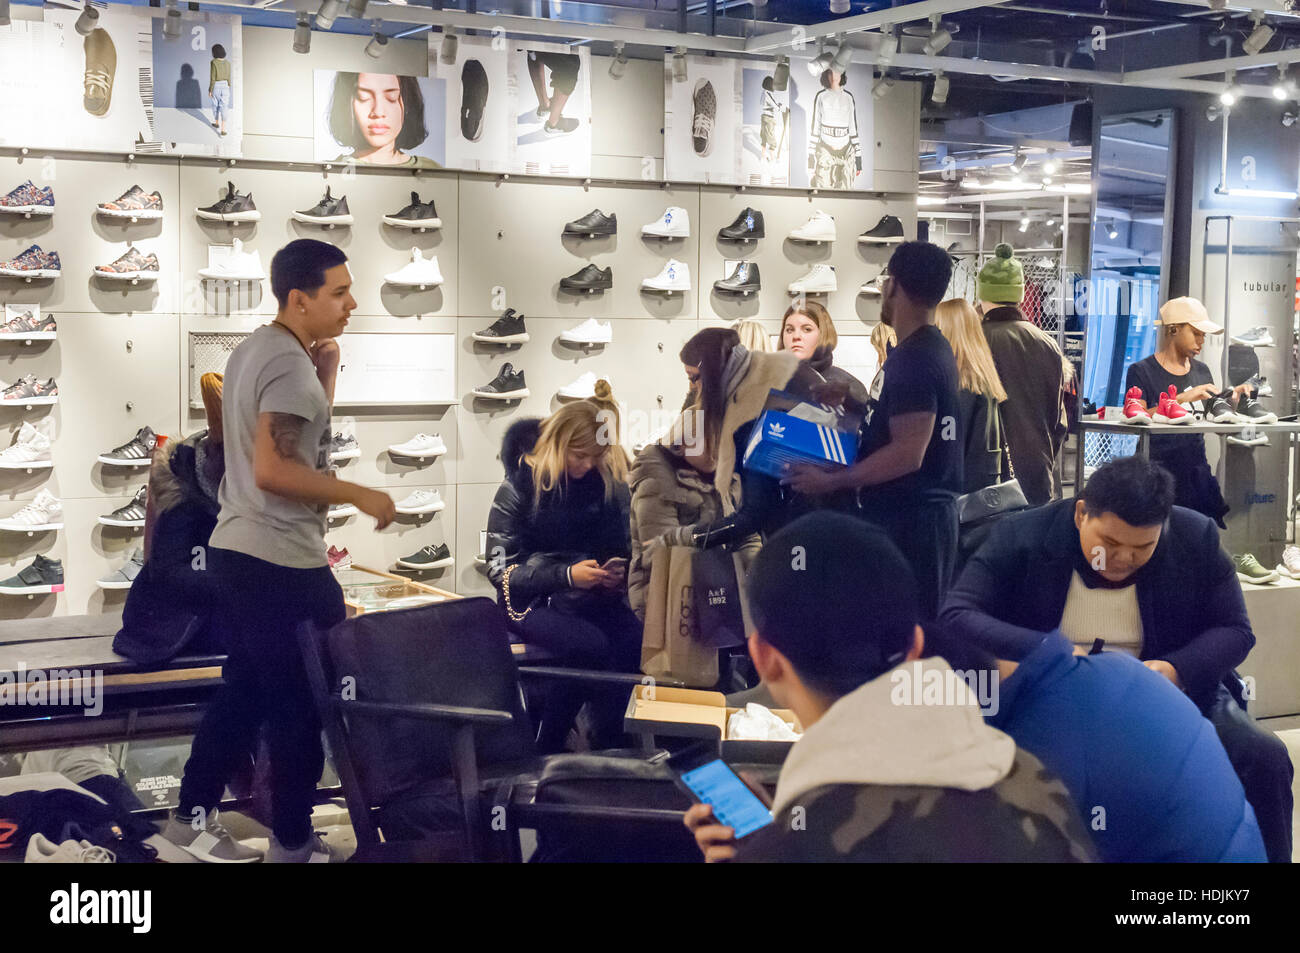 Customers crowd the new Adidas flagship store on Fifth Avenue in New York  on Sunday, December 11, 2016. At 45,000 square feet the store is Adidas'  largest. Nike, the world's largest manufacturer